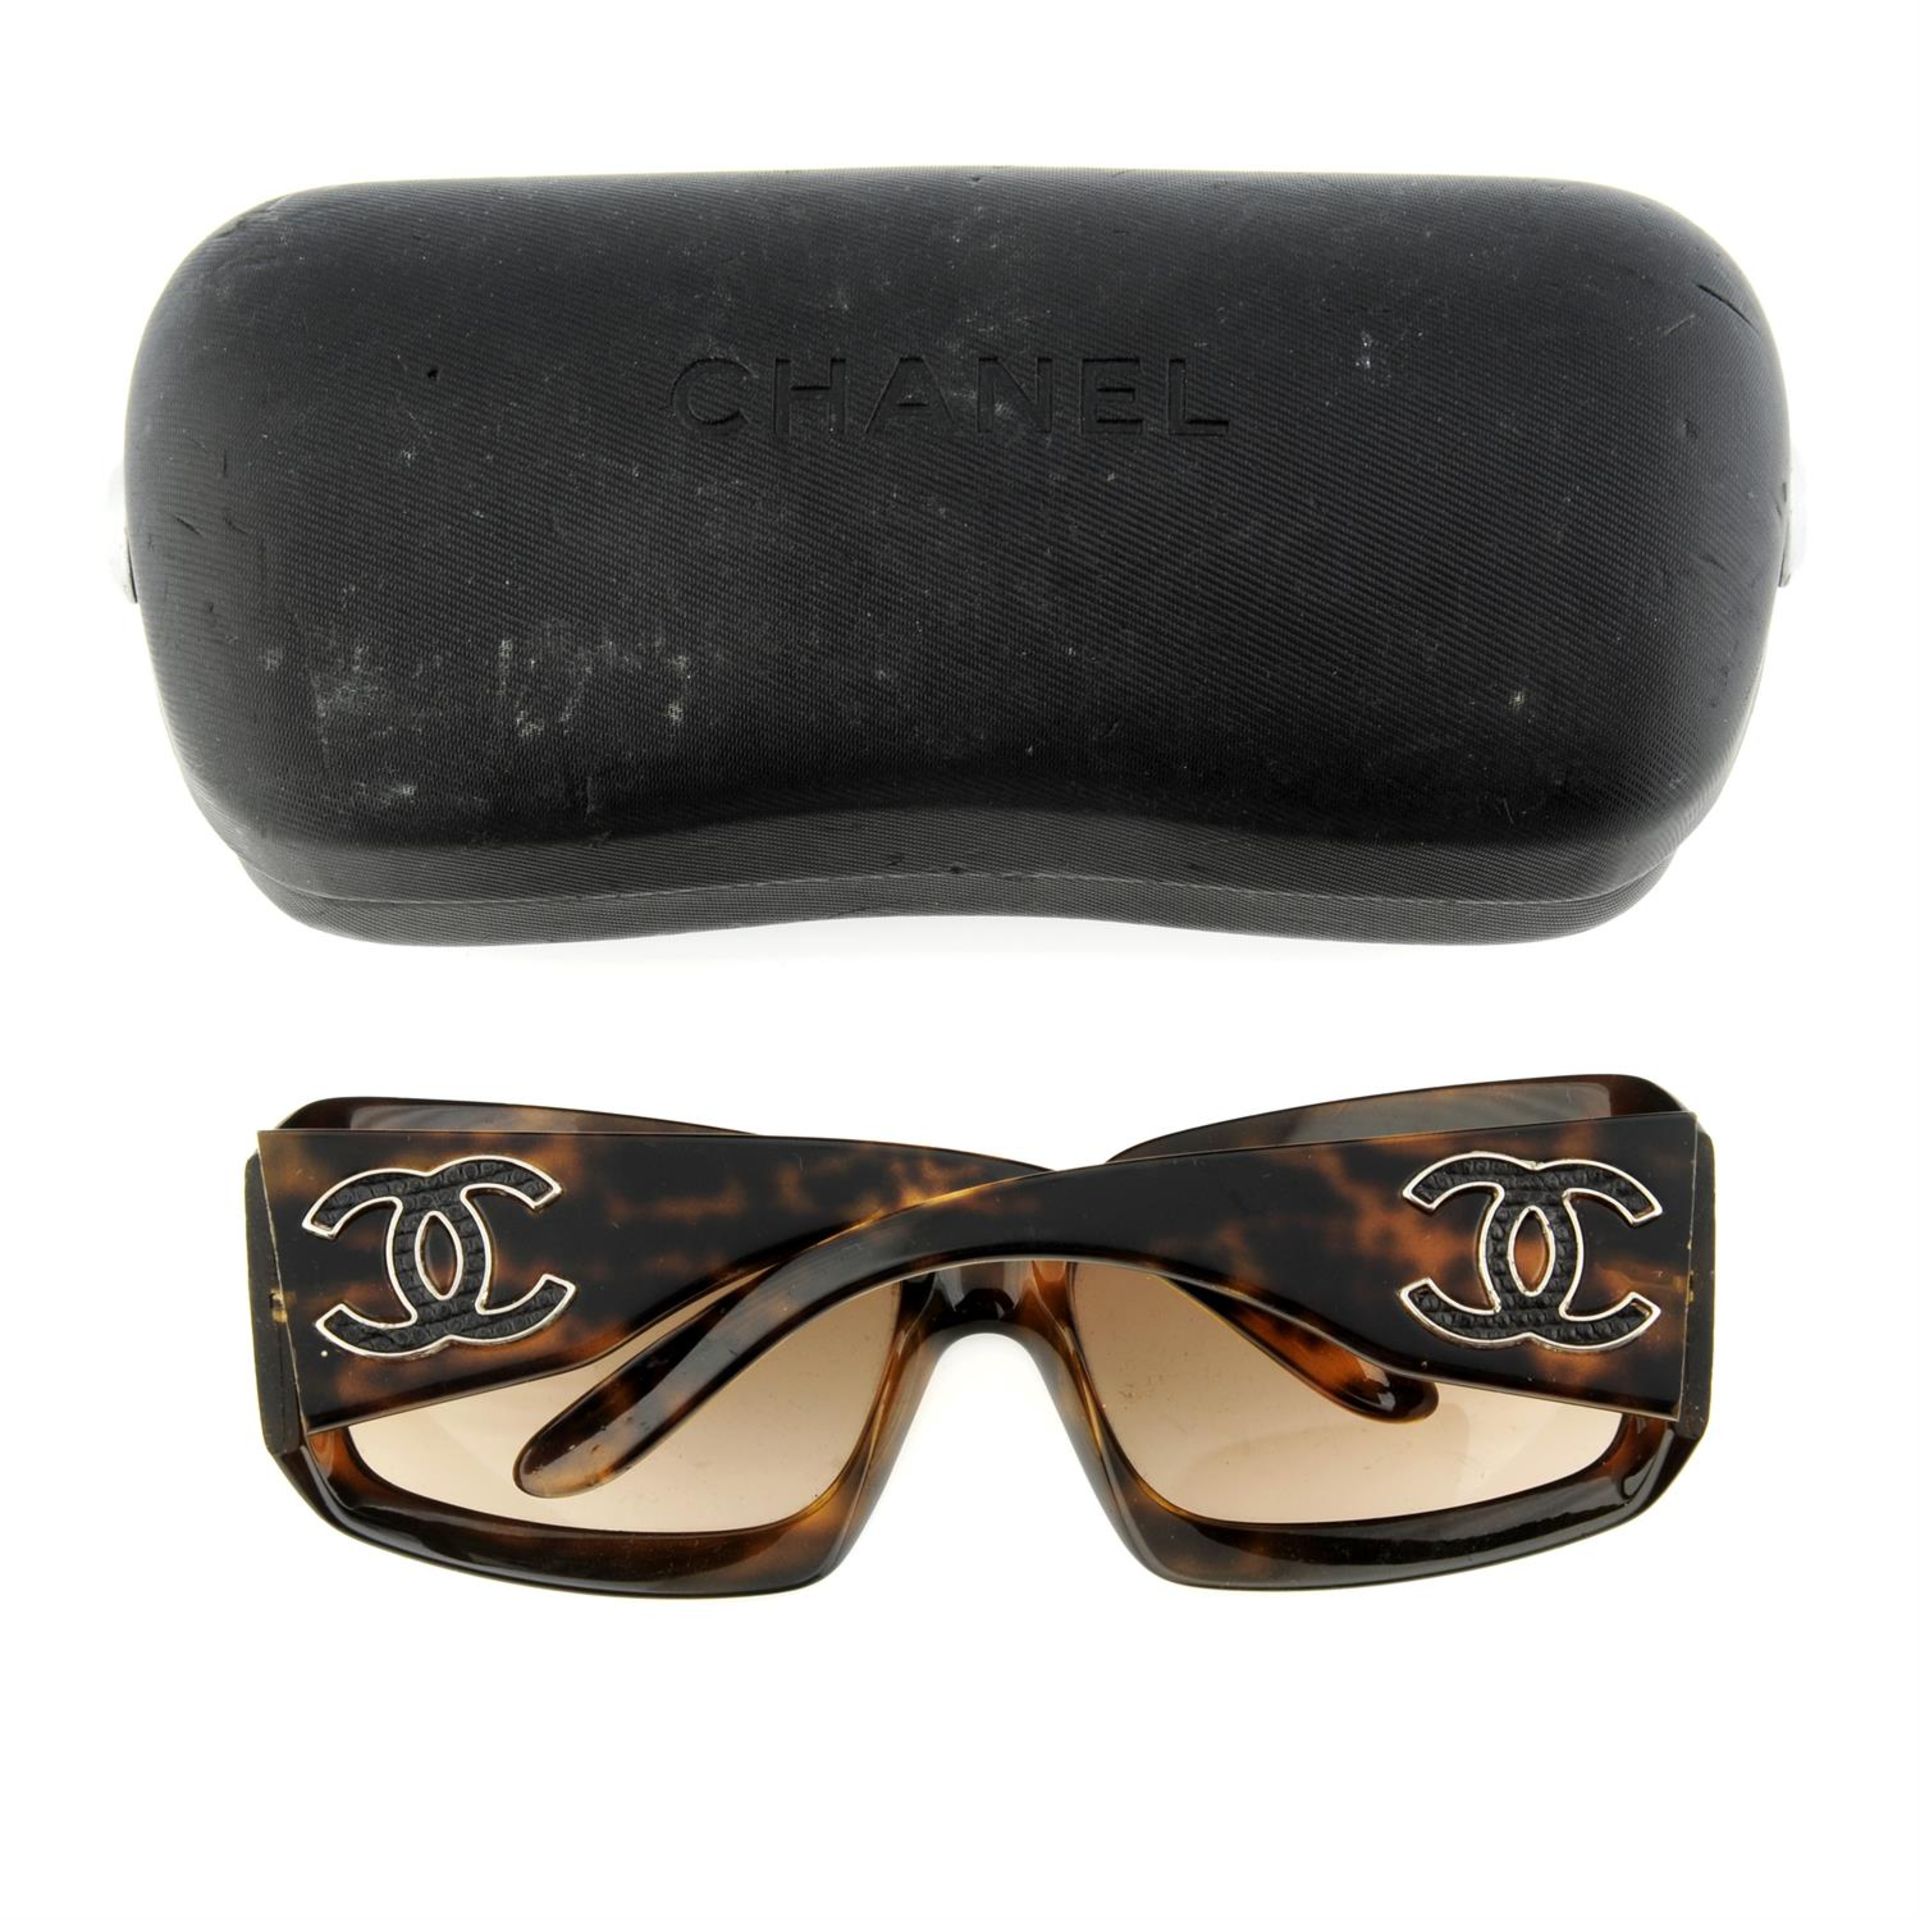 CHANEL - a pair of sunglasses. - Image 2 of 2